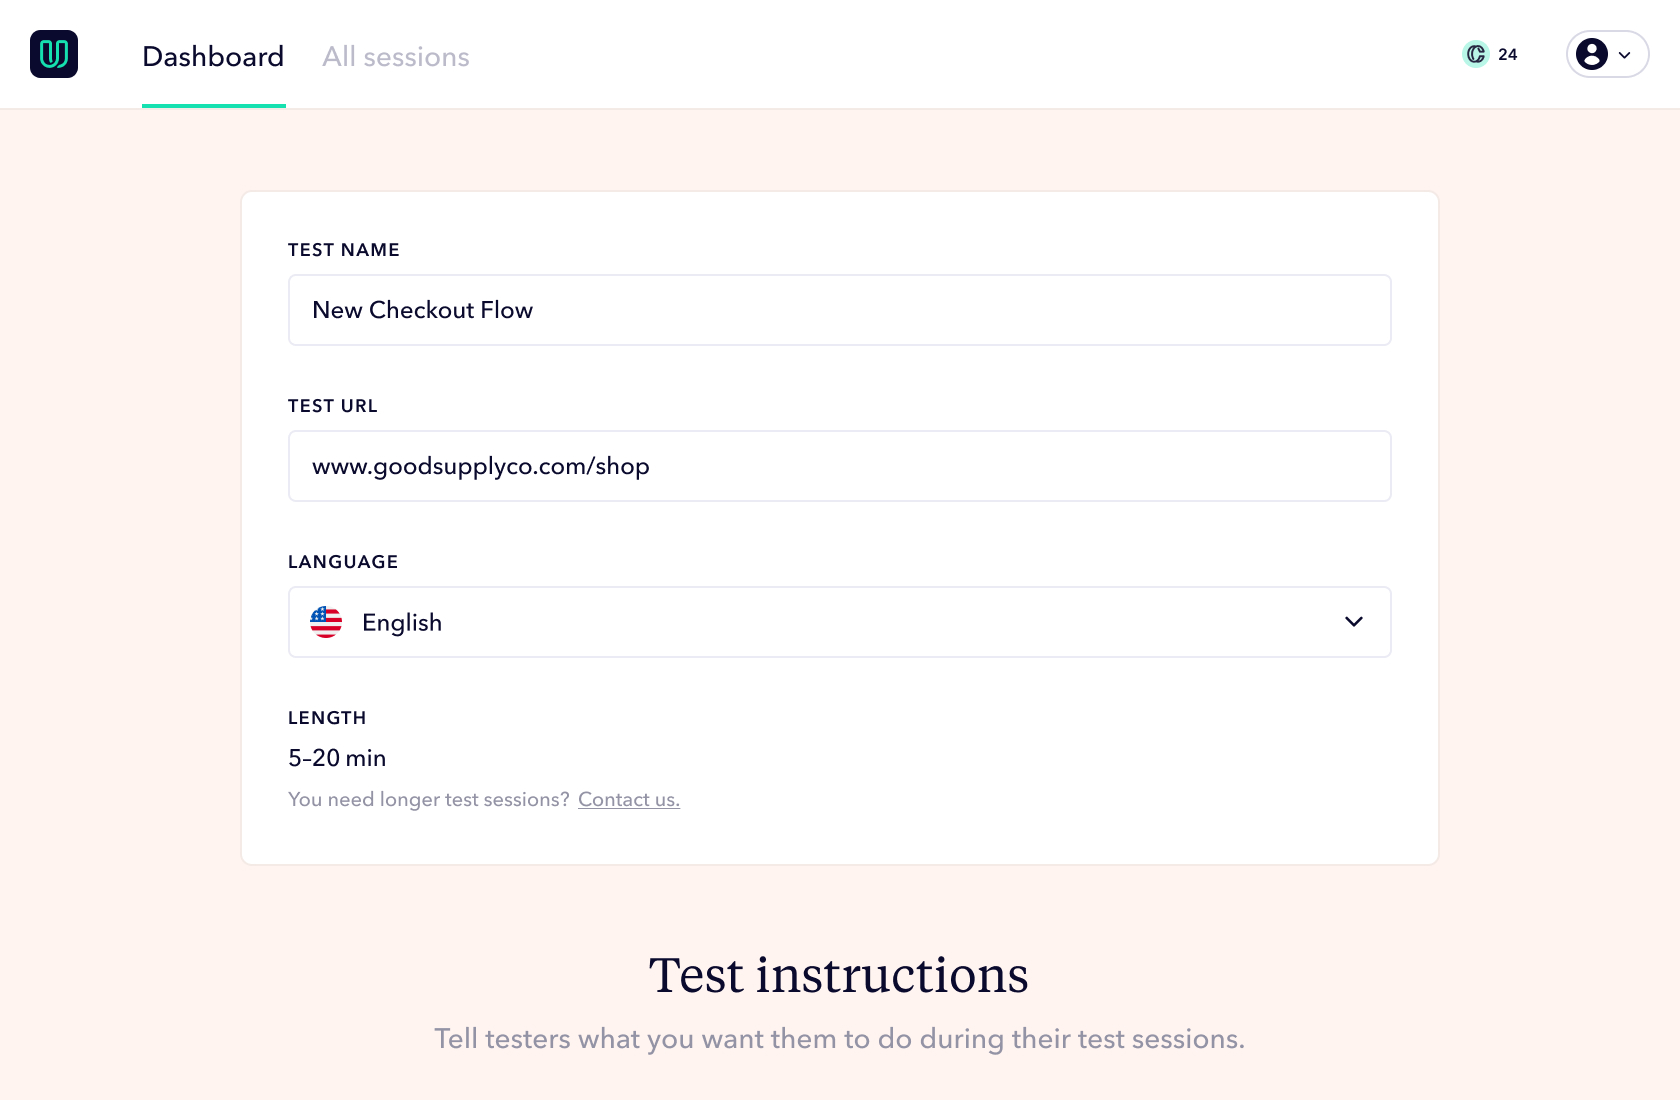 Test instruction editor first step: Set test name, url and language